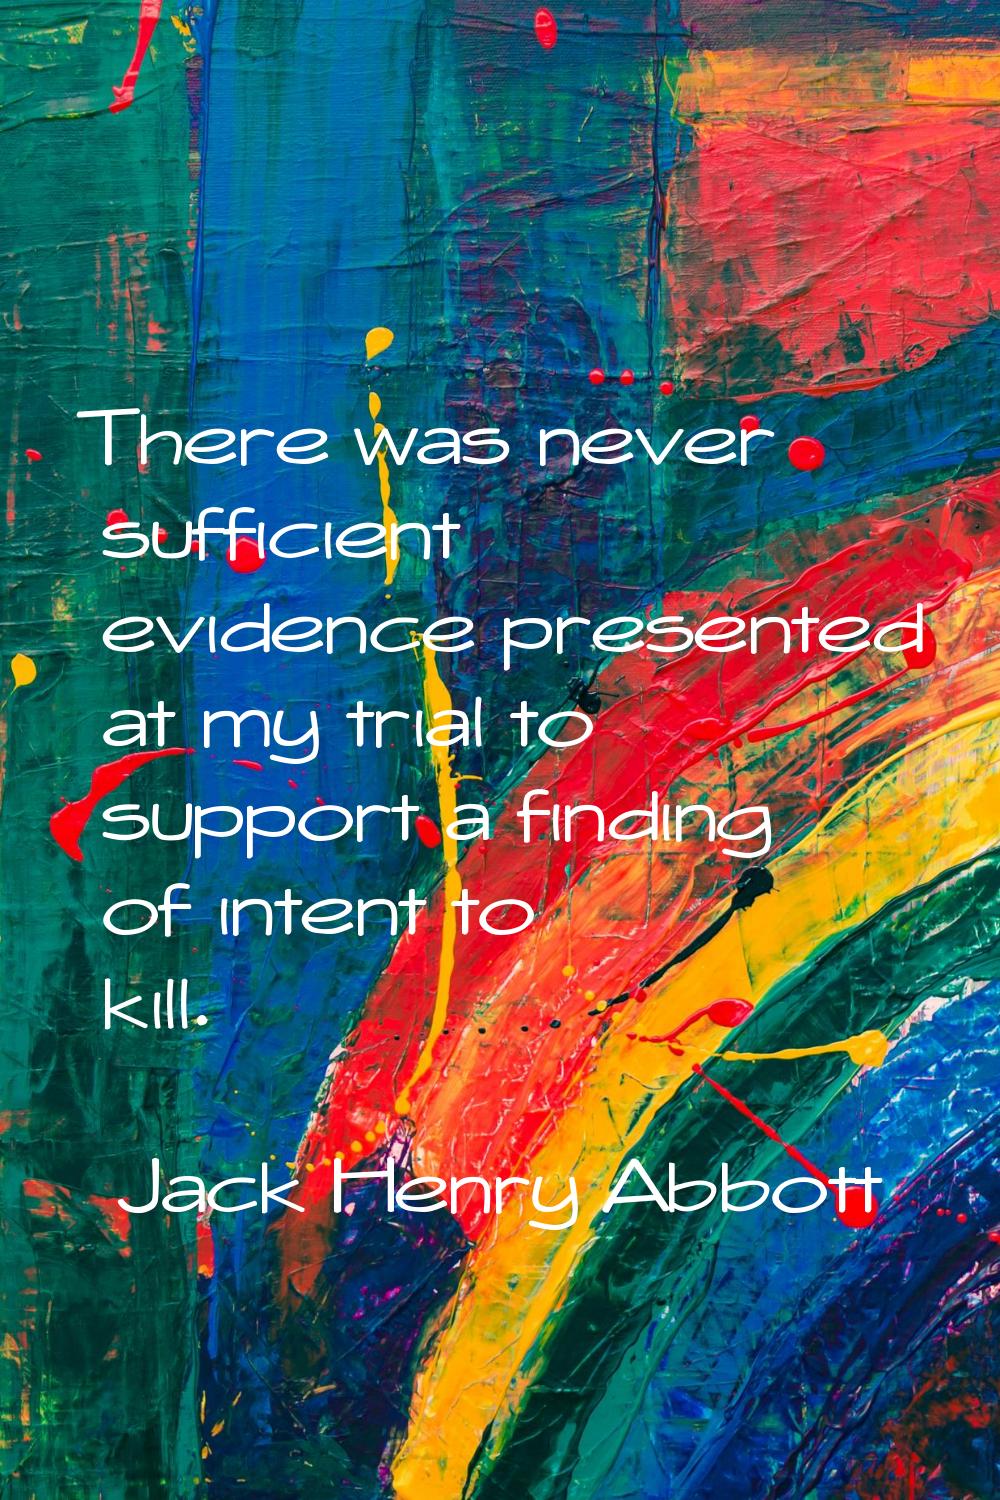 There was never sufficient evidence presented at my trial to support a finding of intent to kill.